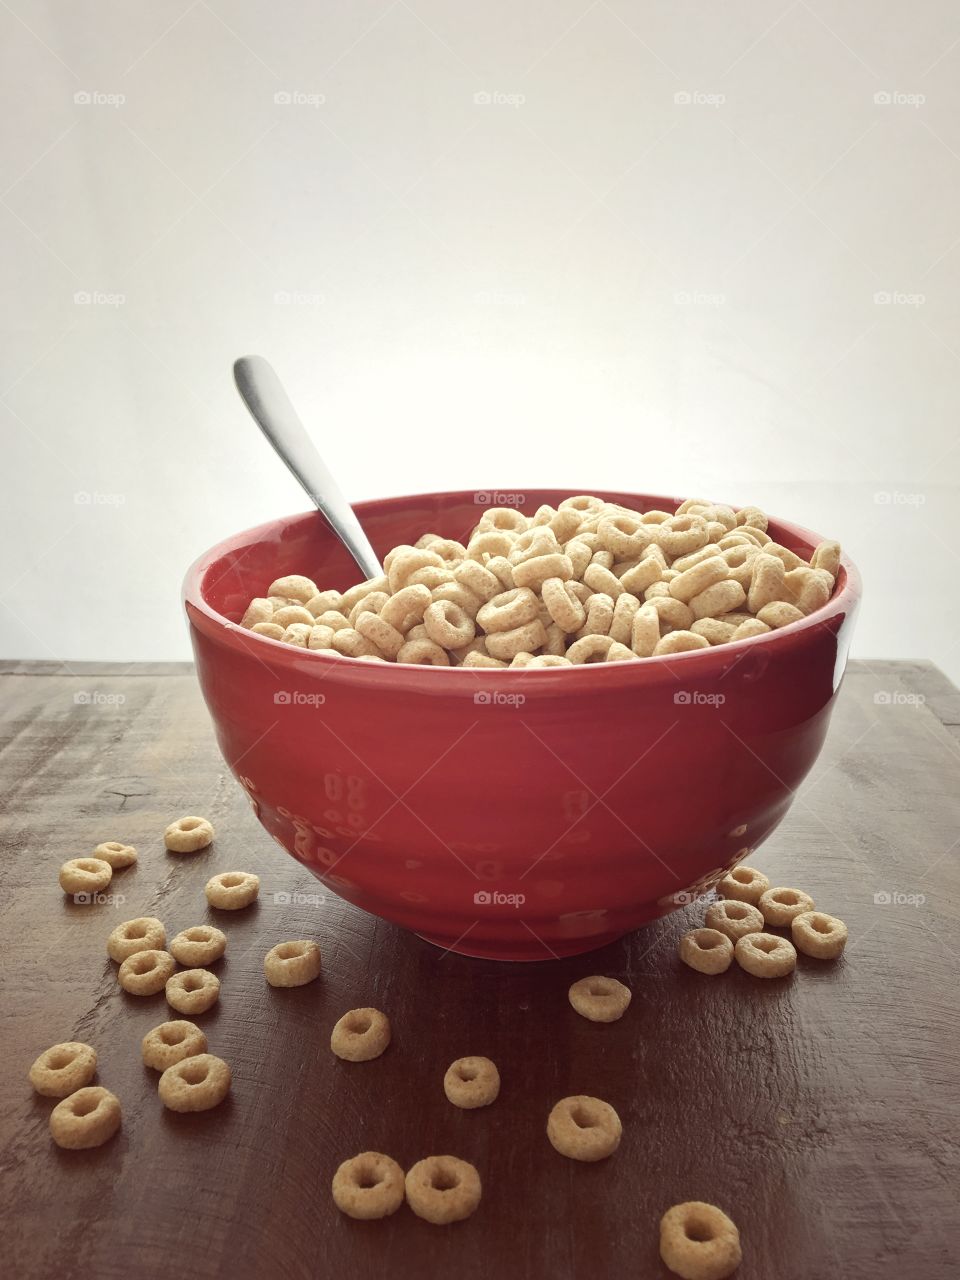 Bowl of a cereal